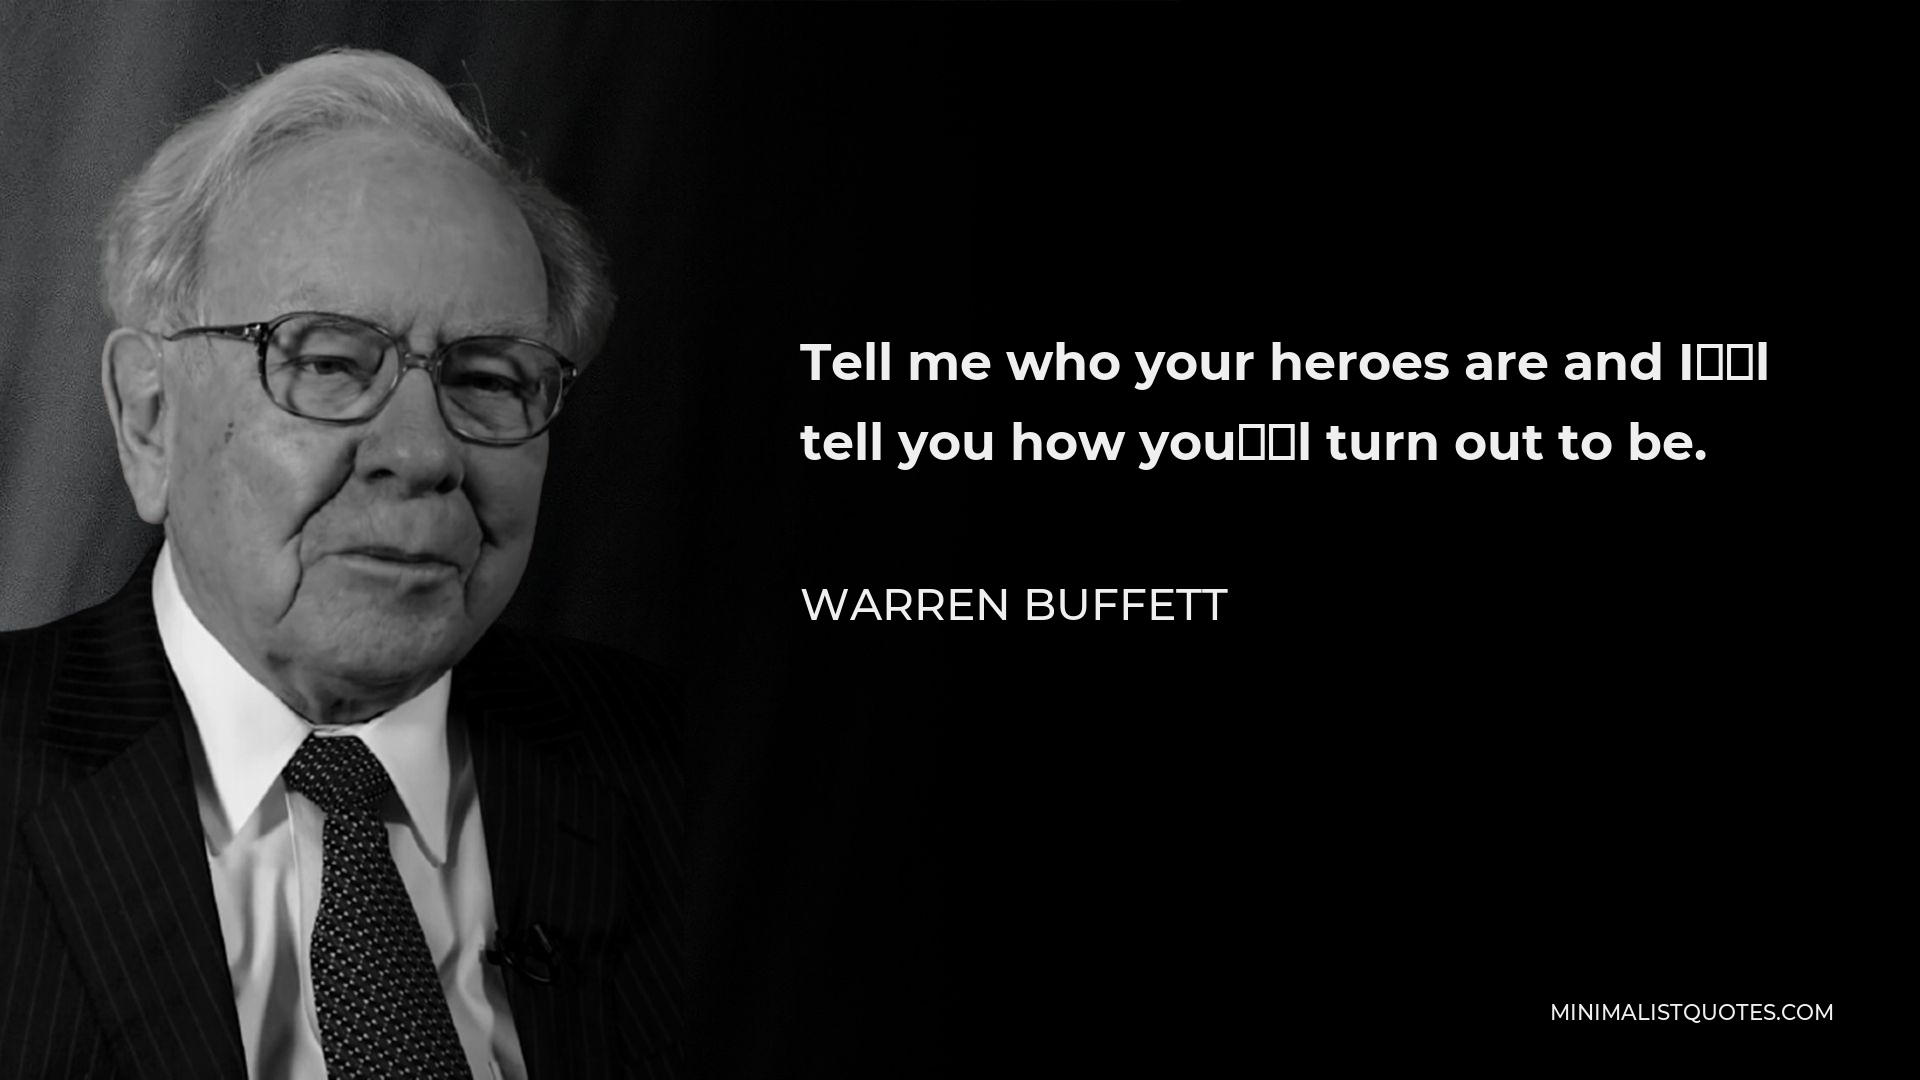 Warren Buffett Quote - Tell me who your heroes are and I’ll tell you how you’ll turn out to be.